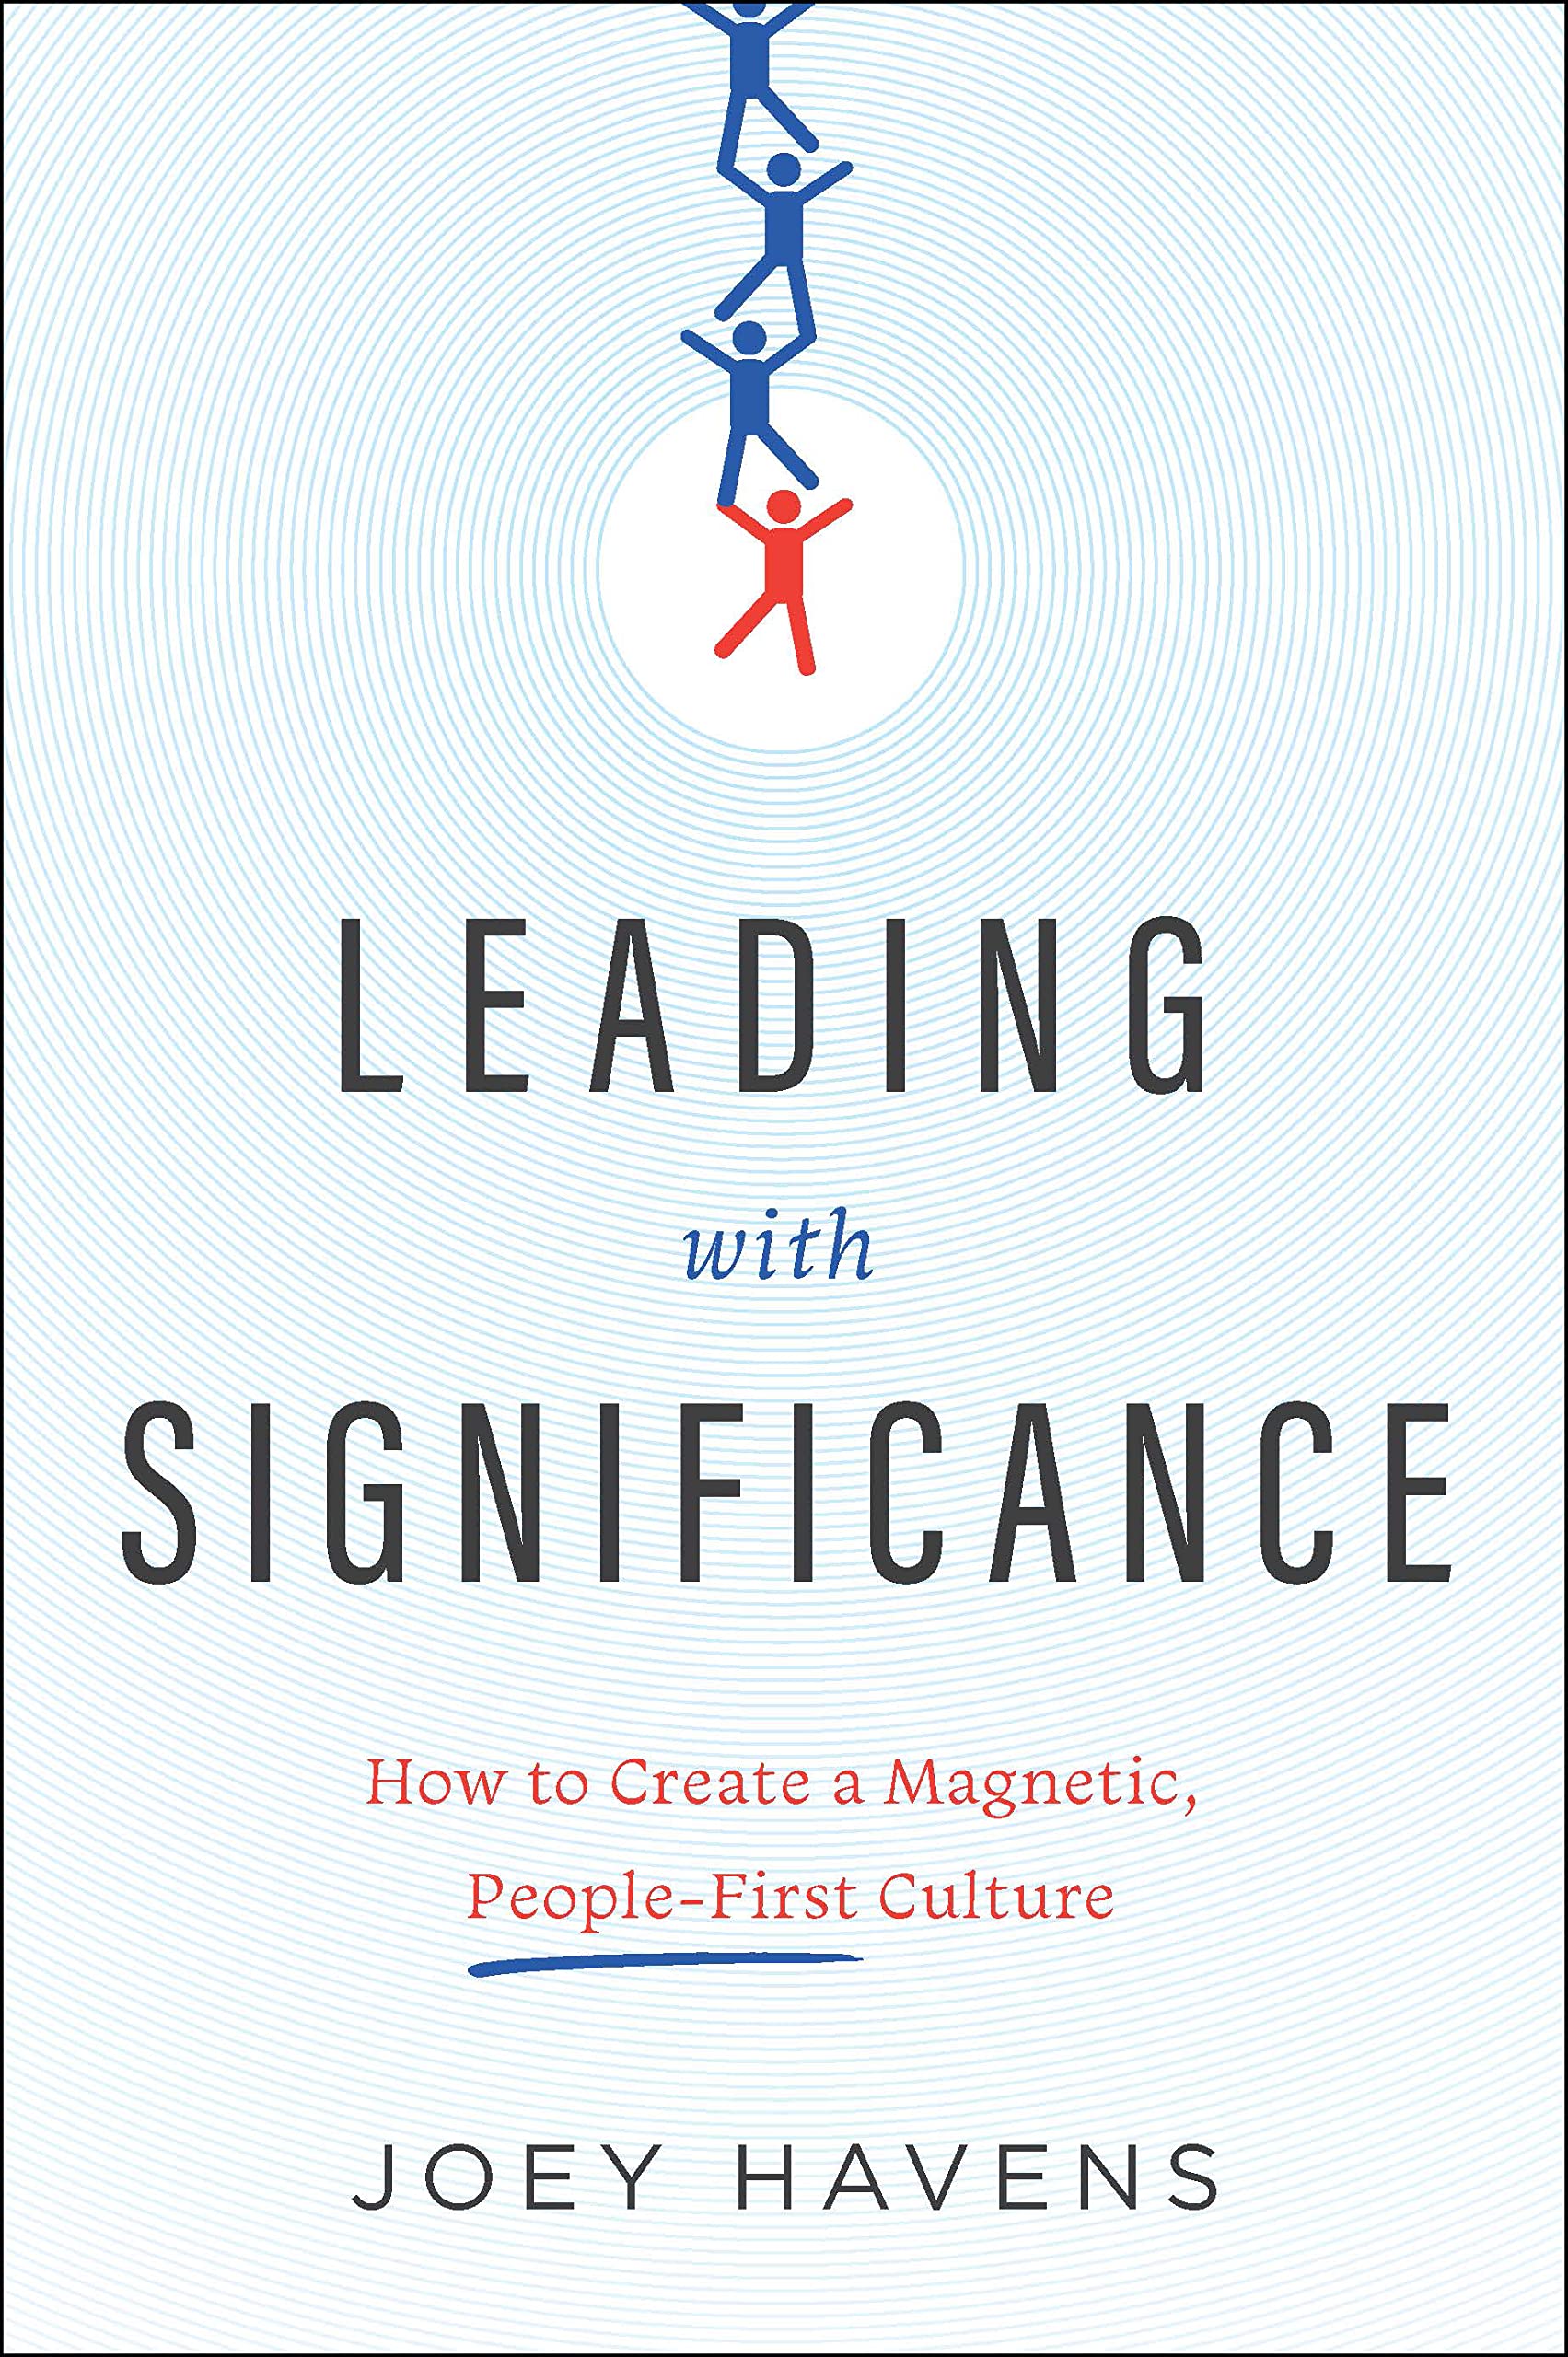 Leading with Significance: How to Create a Magnetic, People-First Culture